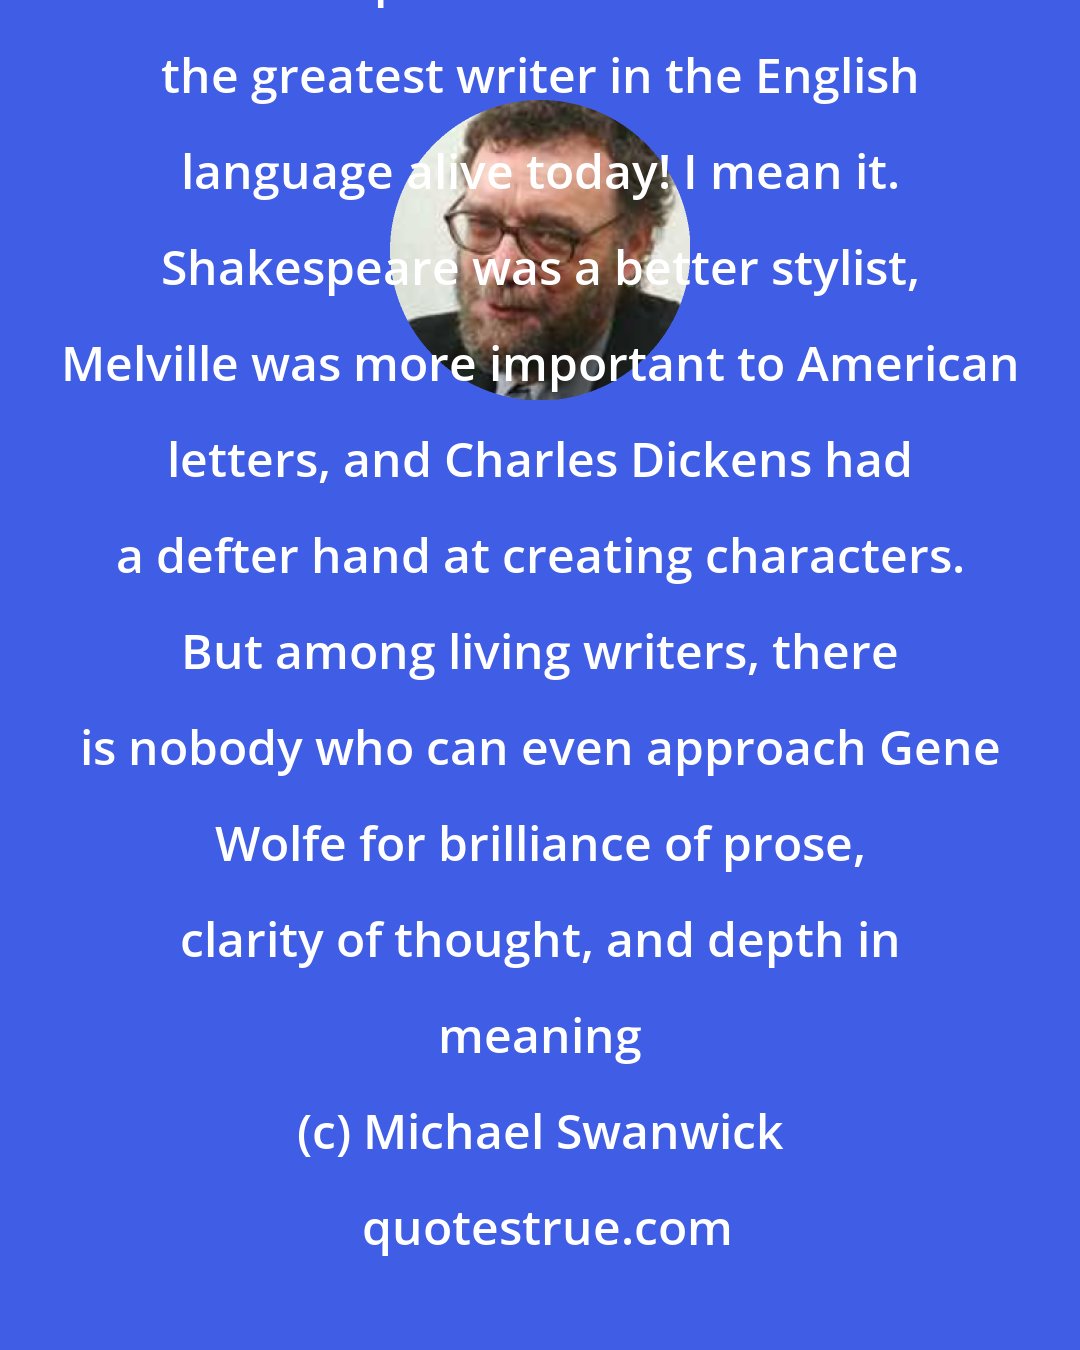 Michael Swanwick: Gene Wolfe is the greatest writer in the English language alive today. Let me repeat that: Gene Wolfe is the greatest writer in the English language alive today! I mean it. Shakespeare was a better stylist, Melville was more important to American letters, and Charles Dickens had a defter hand at creating characters. But among living writers, there is nobody who can even approach Gene Wolfe for brilliance of prose, clarity of thought, and depth in meaning